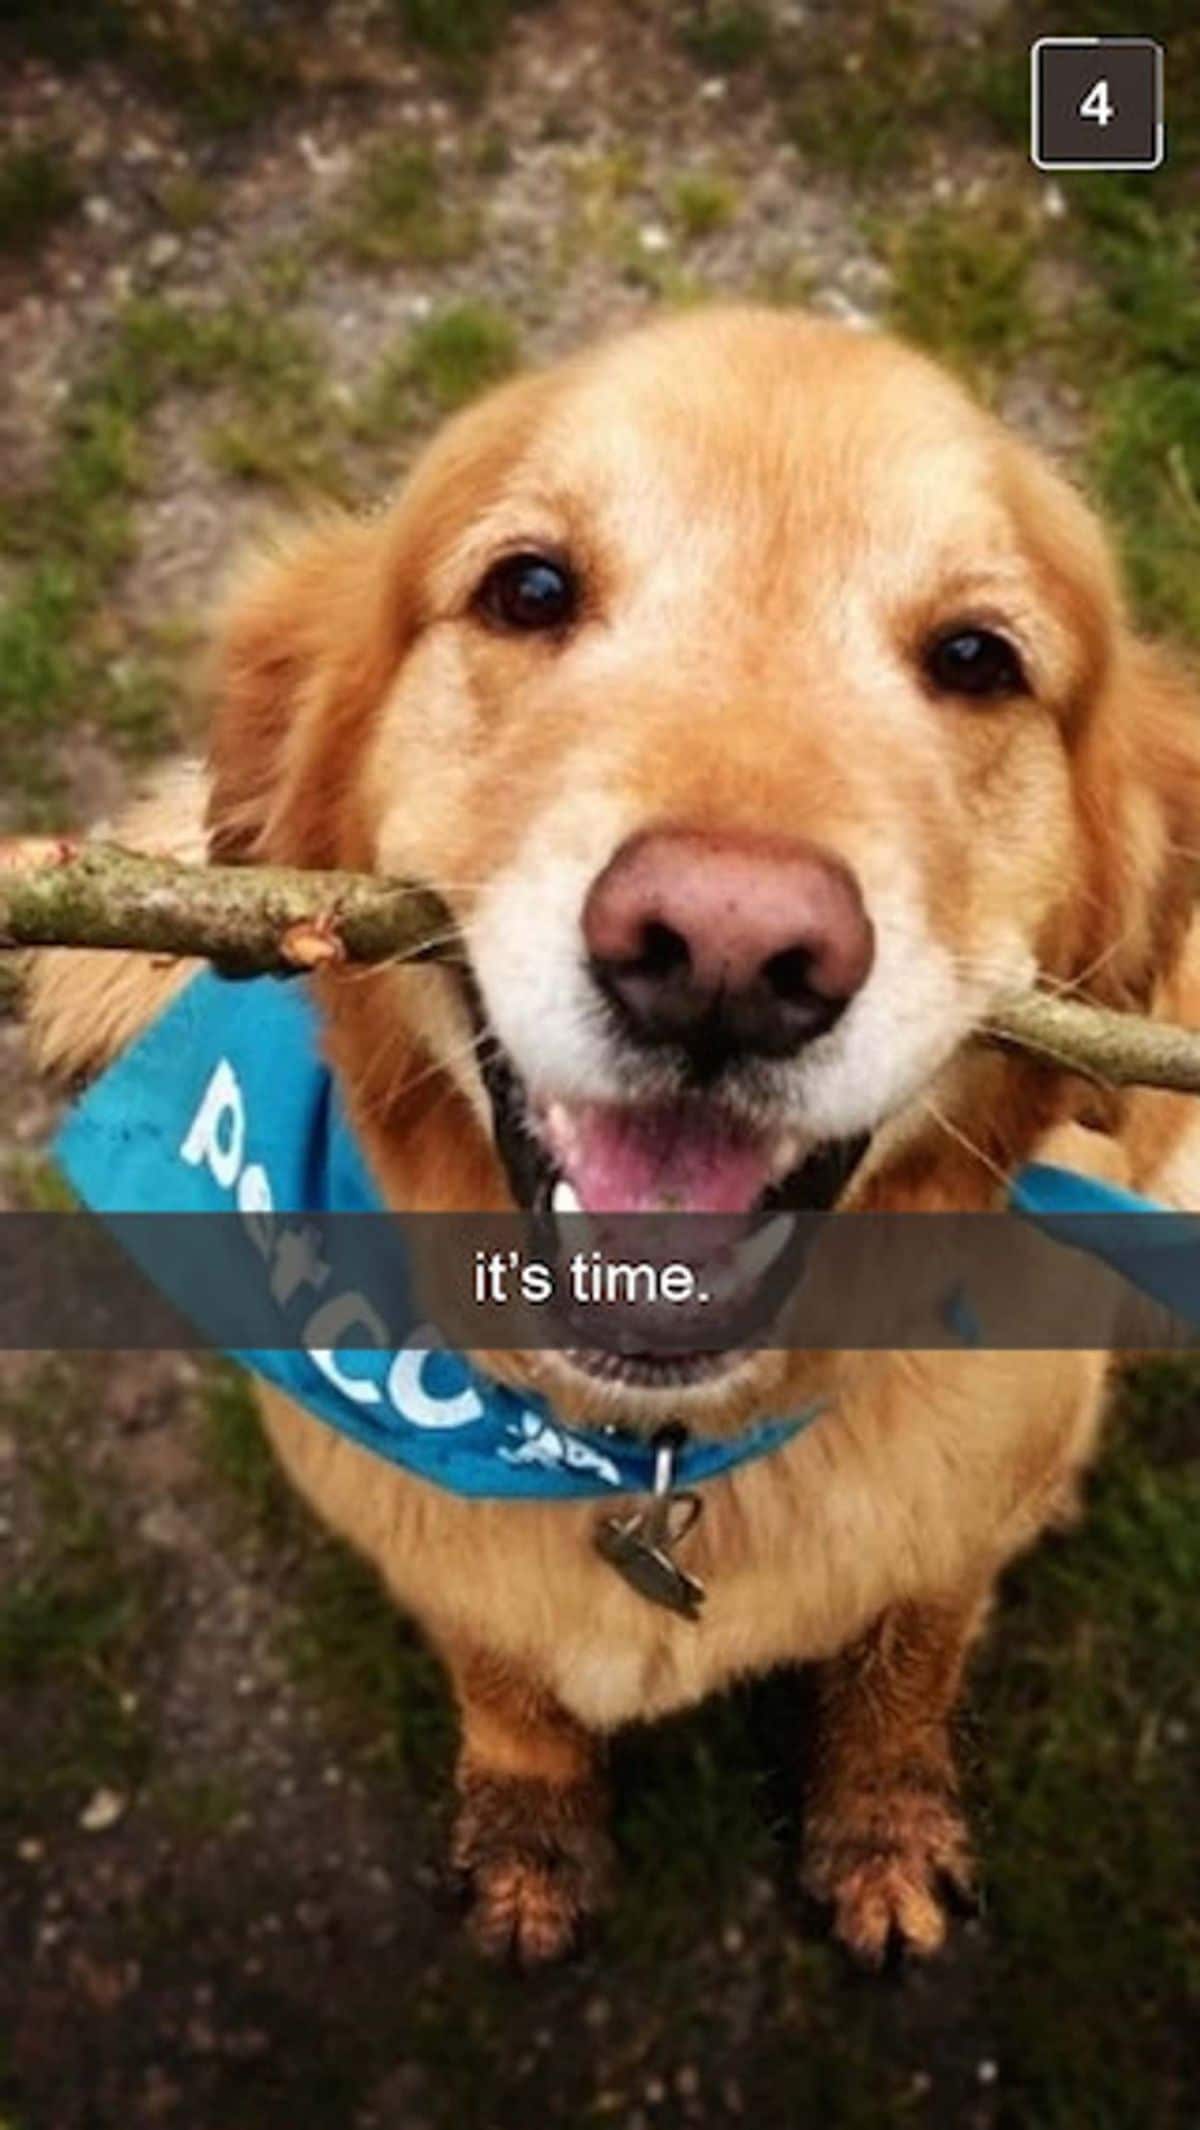 old golden retriever with blue bandana and stick in the mouth with the caption it's time